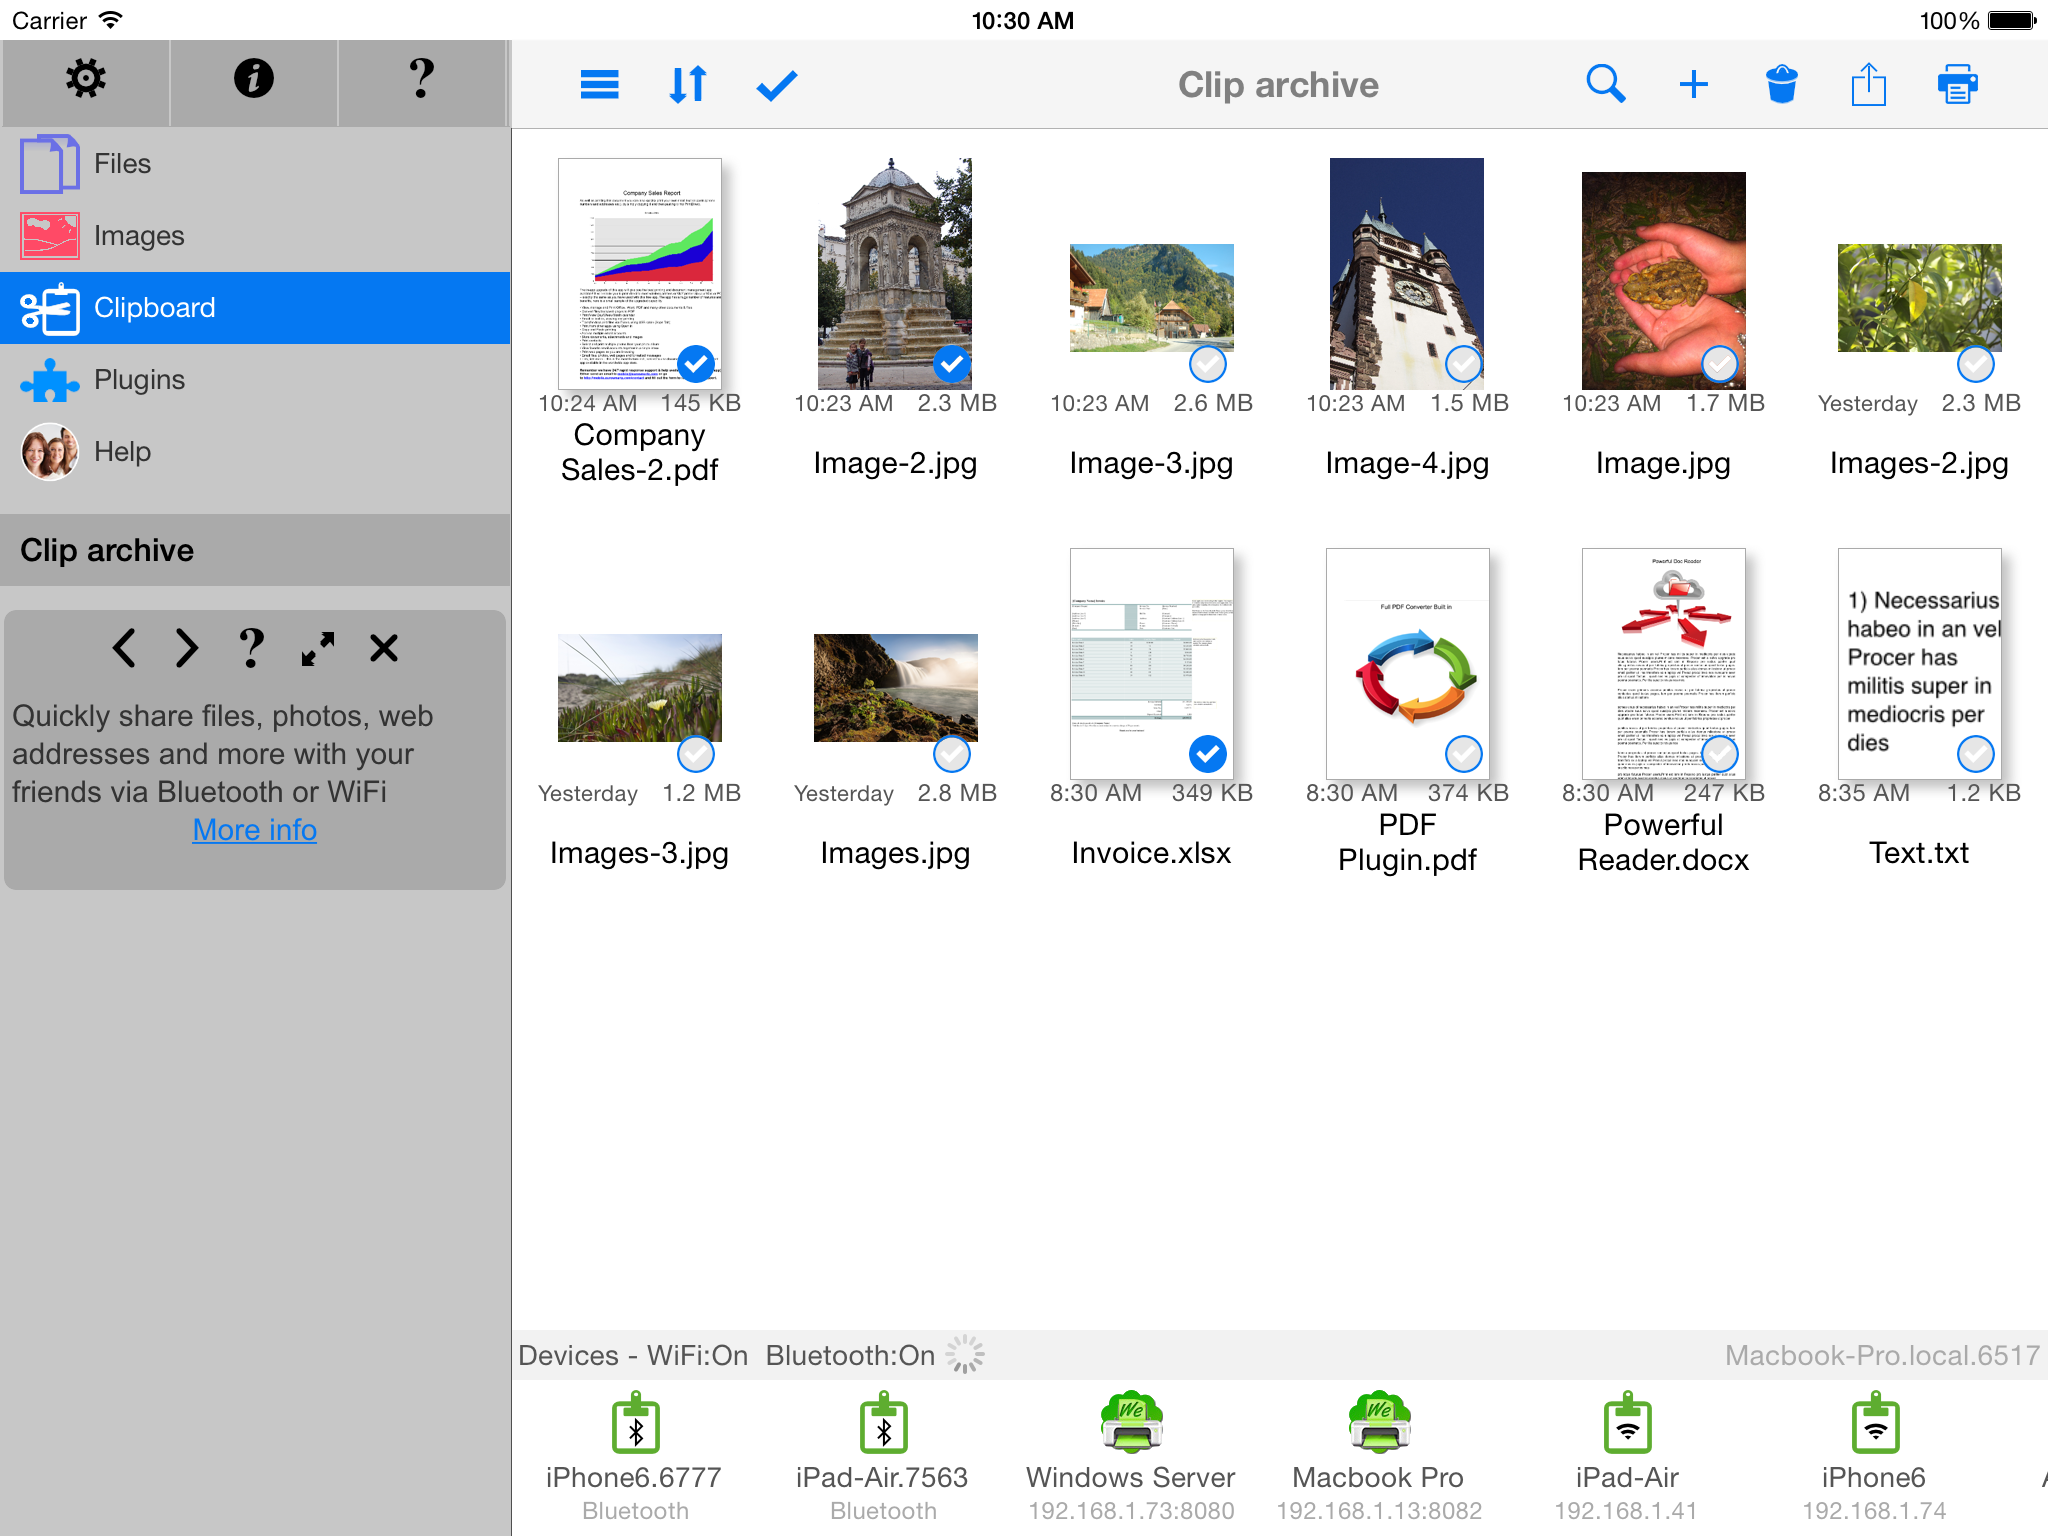 Manage all iPhone/iPad and Cloud Files - in FileCentral for iOS 9 Image